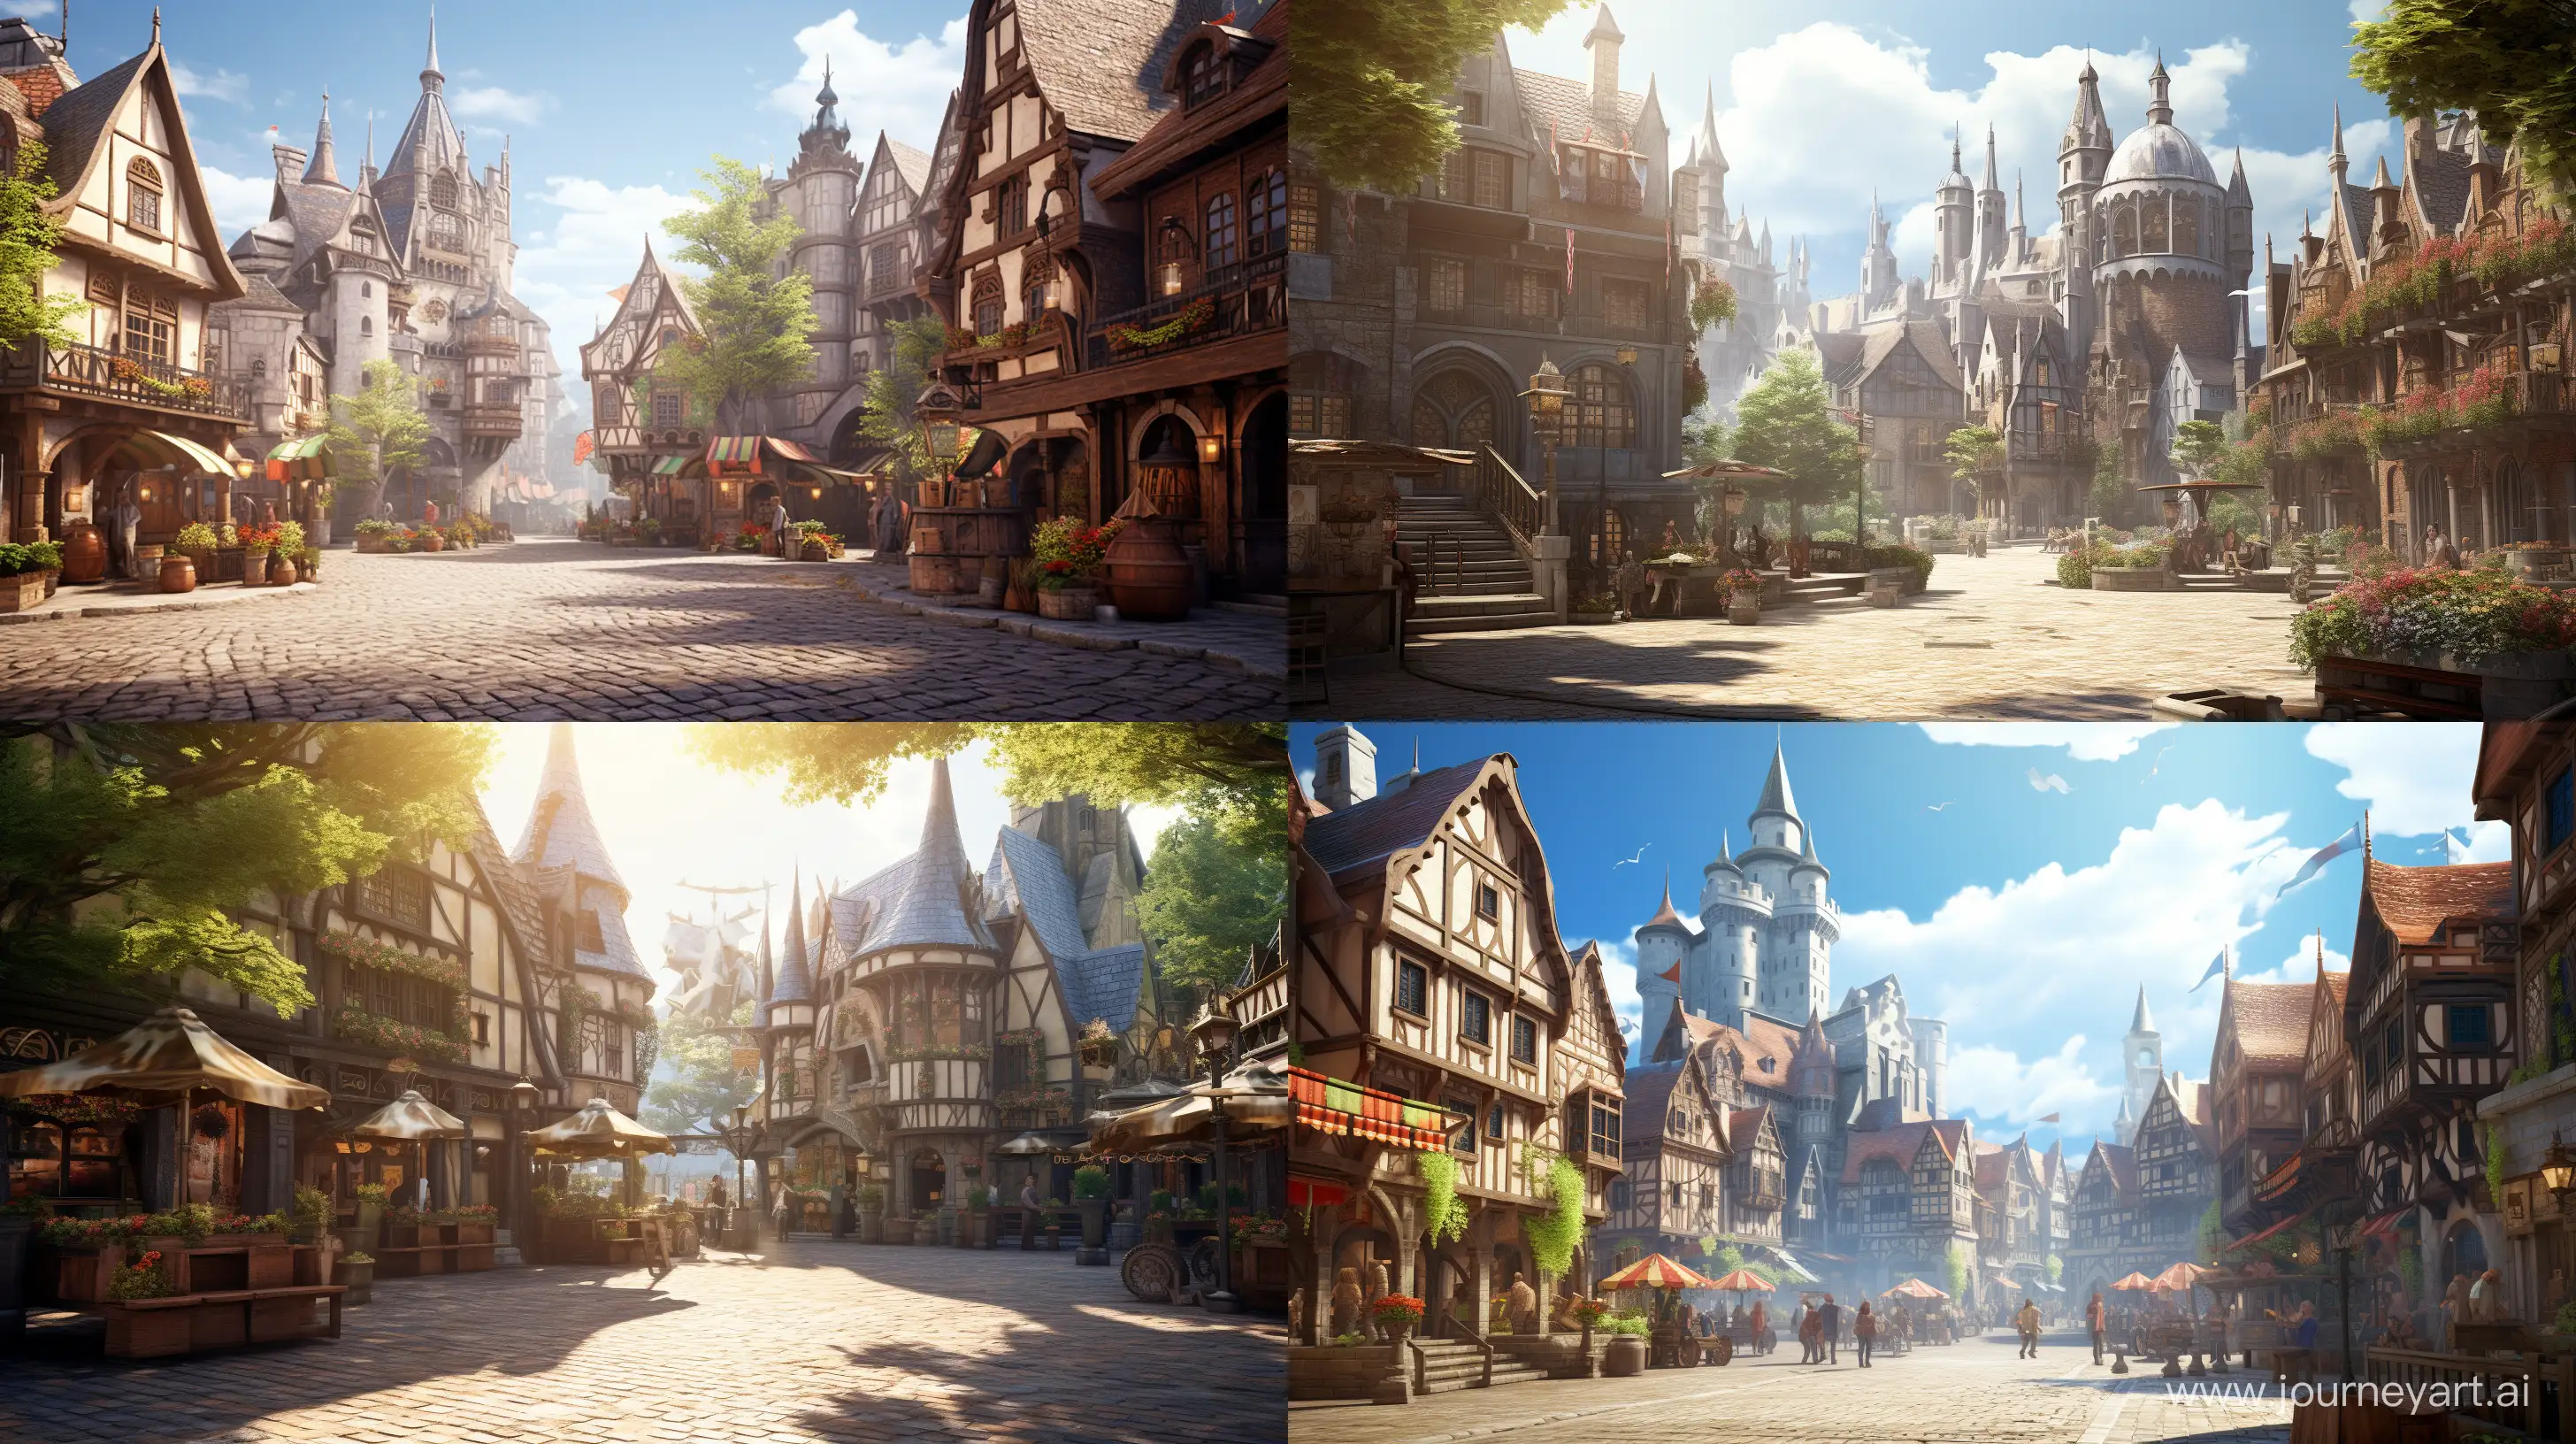  A bustling medieval town square with vibrant cobblestone streets, lively market stalls, and townspeople engaged in daily activities. The sunlight bathes the scene in a warm glow, creating a lively and inviting atmosphere. Photography, realistic style with a 50mm lens, capturing the details of the market and people, --ar 16:9